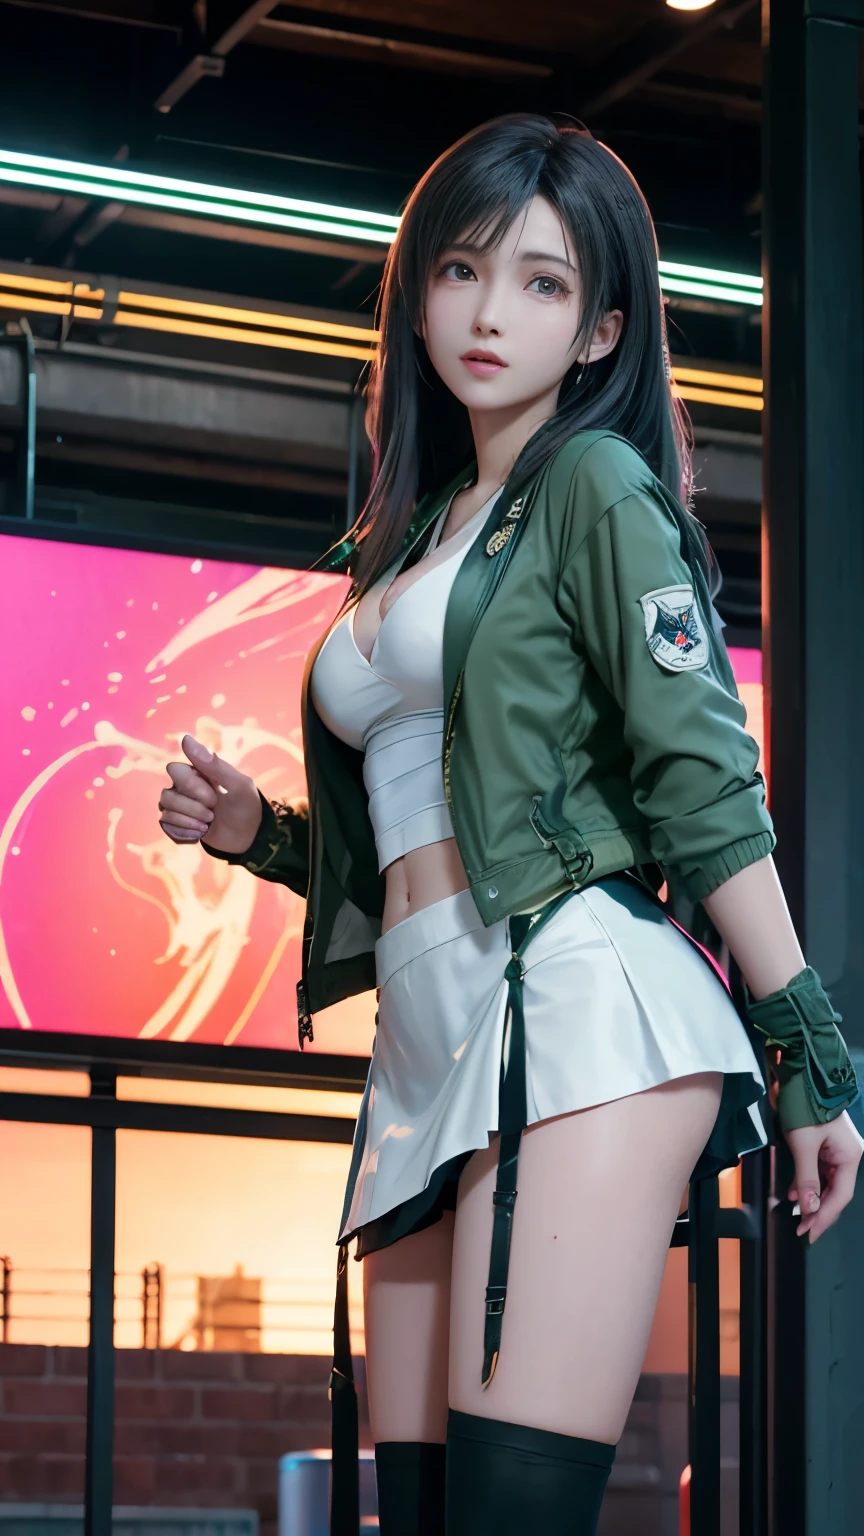 8K resolution, masterpiece, Highest quality, Award-winning works, unrealistic, tifa lockhart, 20-year-old, sexy college school girl, (black long hair:1.3), beautiful Perfect Face, Soft Skin, Perfect Face, Yasutomo Oka's painting style, 165cm tall, Three sizes are 92/60/88, (green jacket:1.5), white silk camisole, deep Cleavage, blue very long skirt with many pIeats, black garter belts, knee high socks, black pumps, details, Splash screen,Sharp eyes, crystal blue eyes, pink lips, BREAK, White Silver, dynamic sexy poses, Sweat, Strong winds, standing alone on station platform, waiting for train coming, Osaka Japan